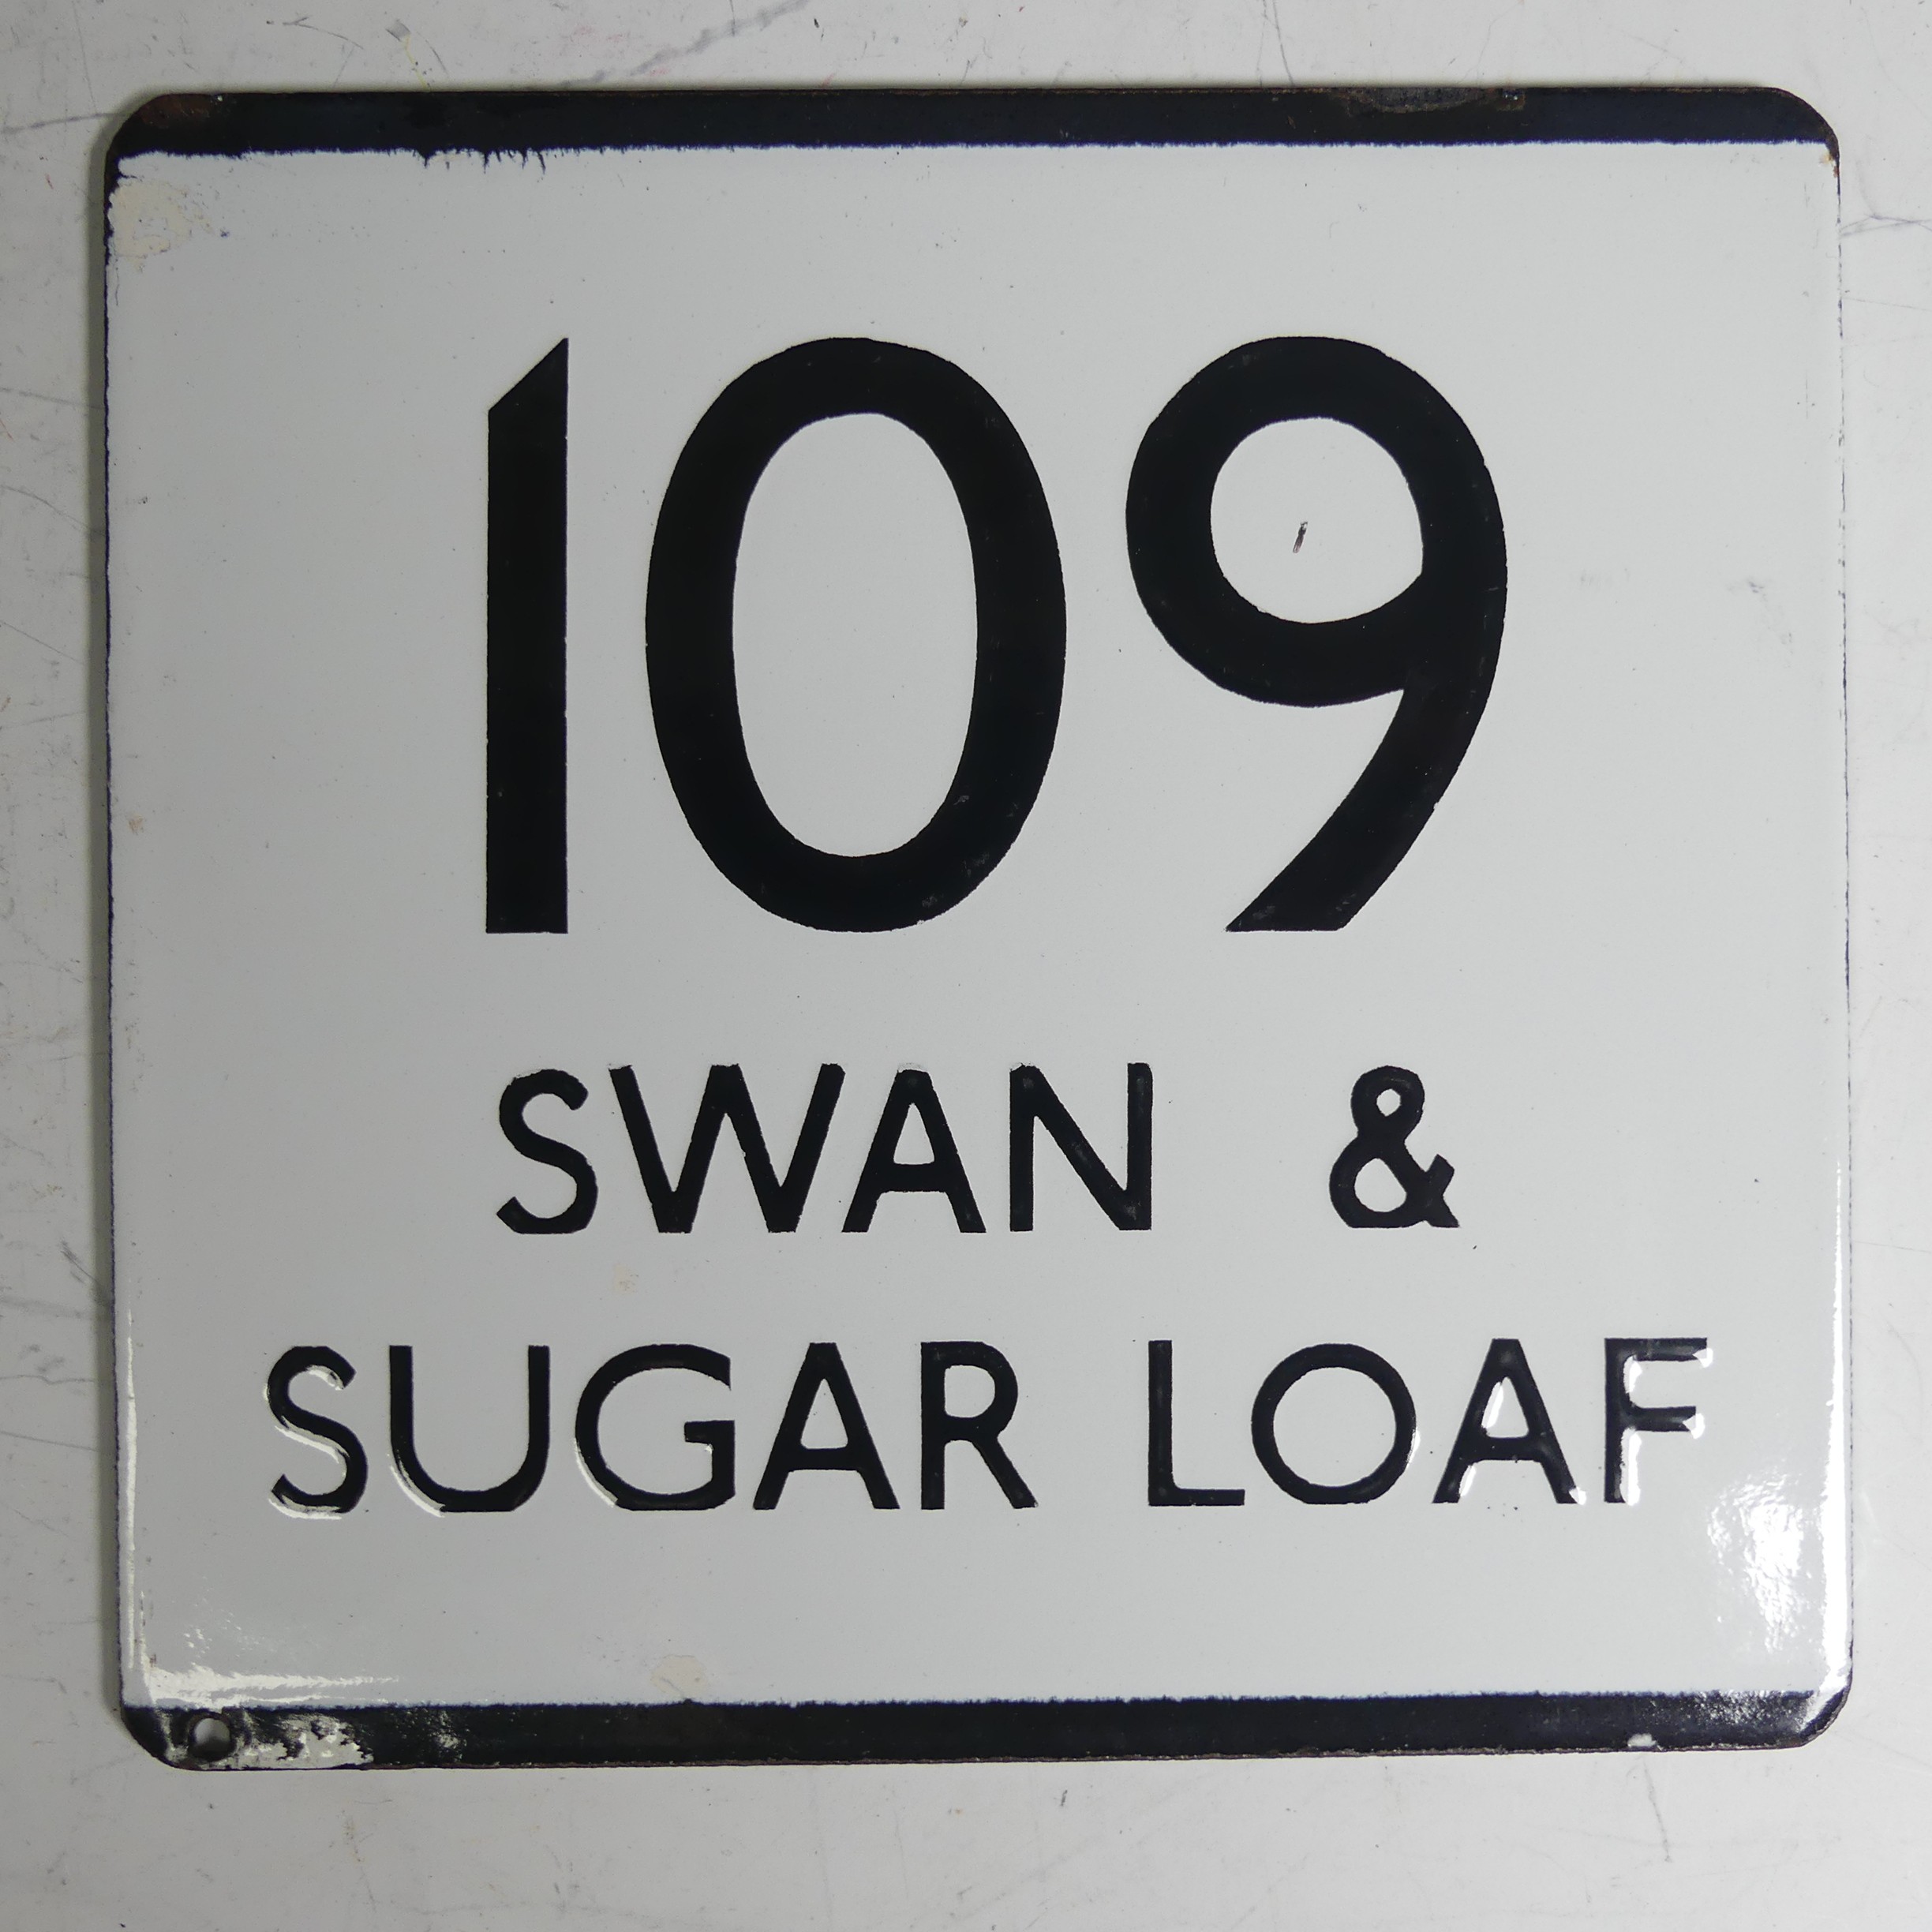 Bus and Coaching Memorabilia; A London Transport enamel Bus Stop E-Plate, Route No. 109 with